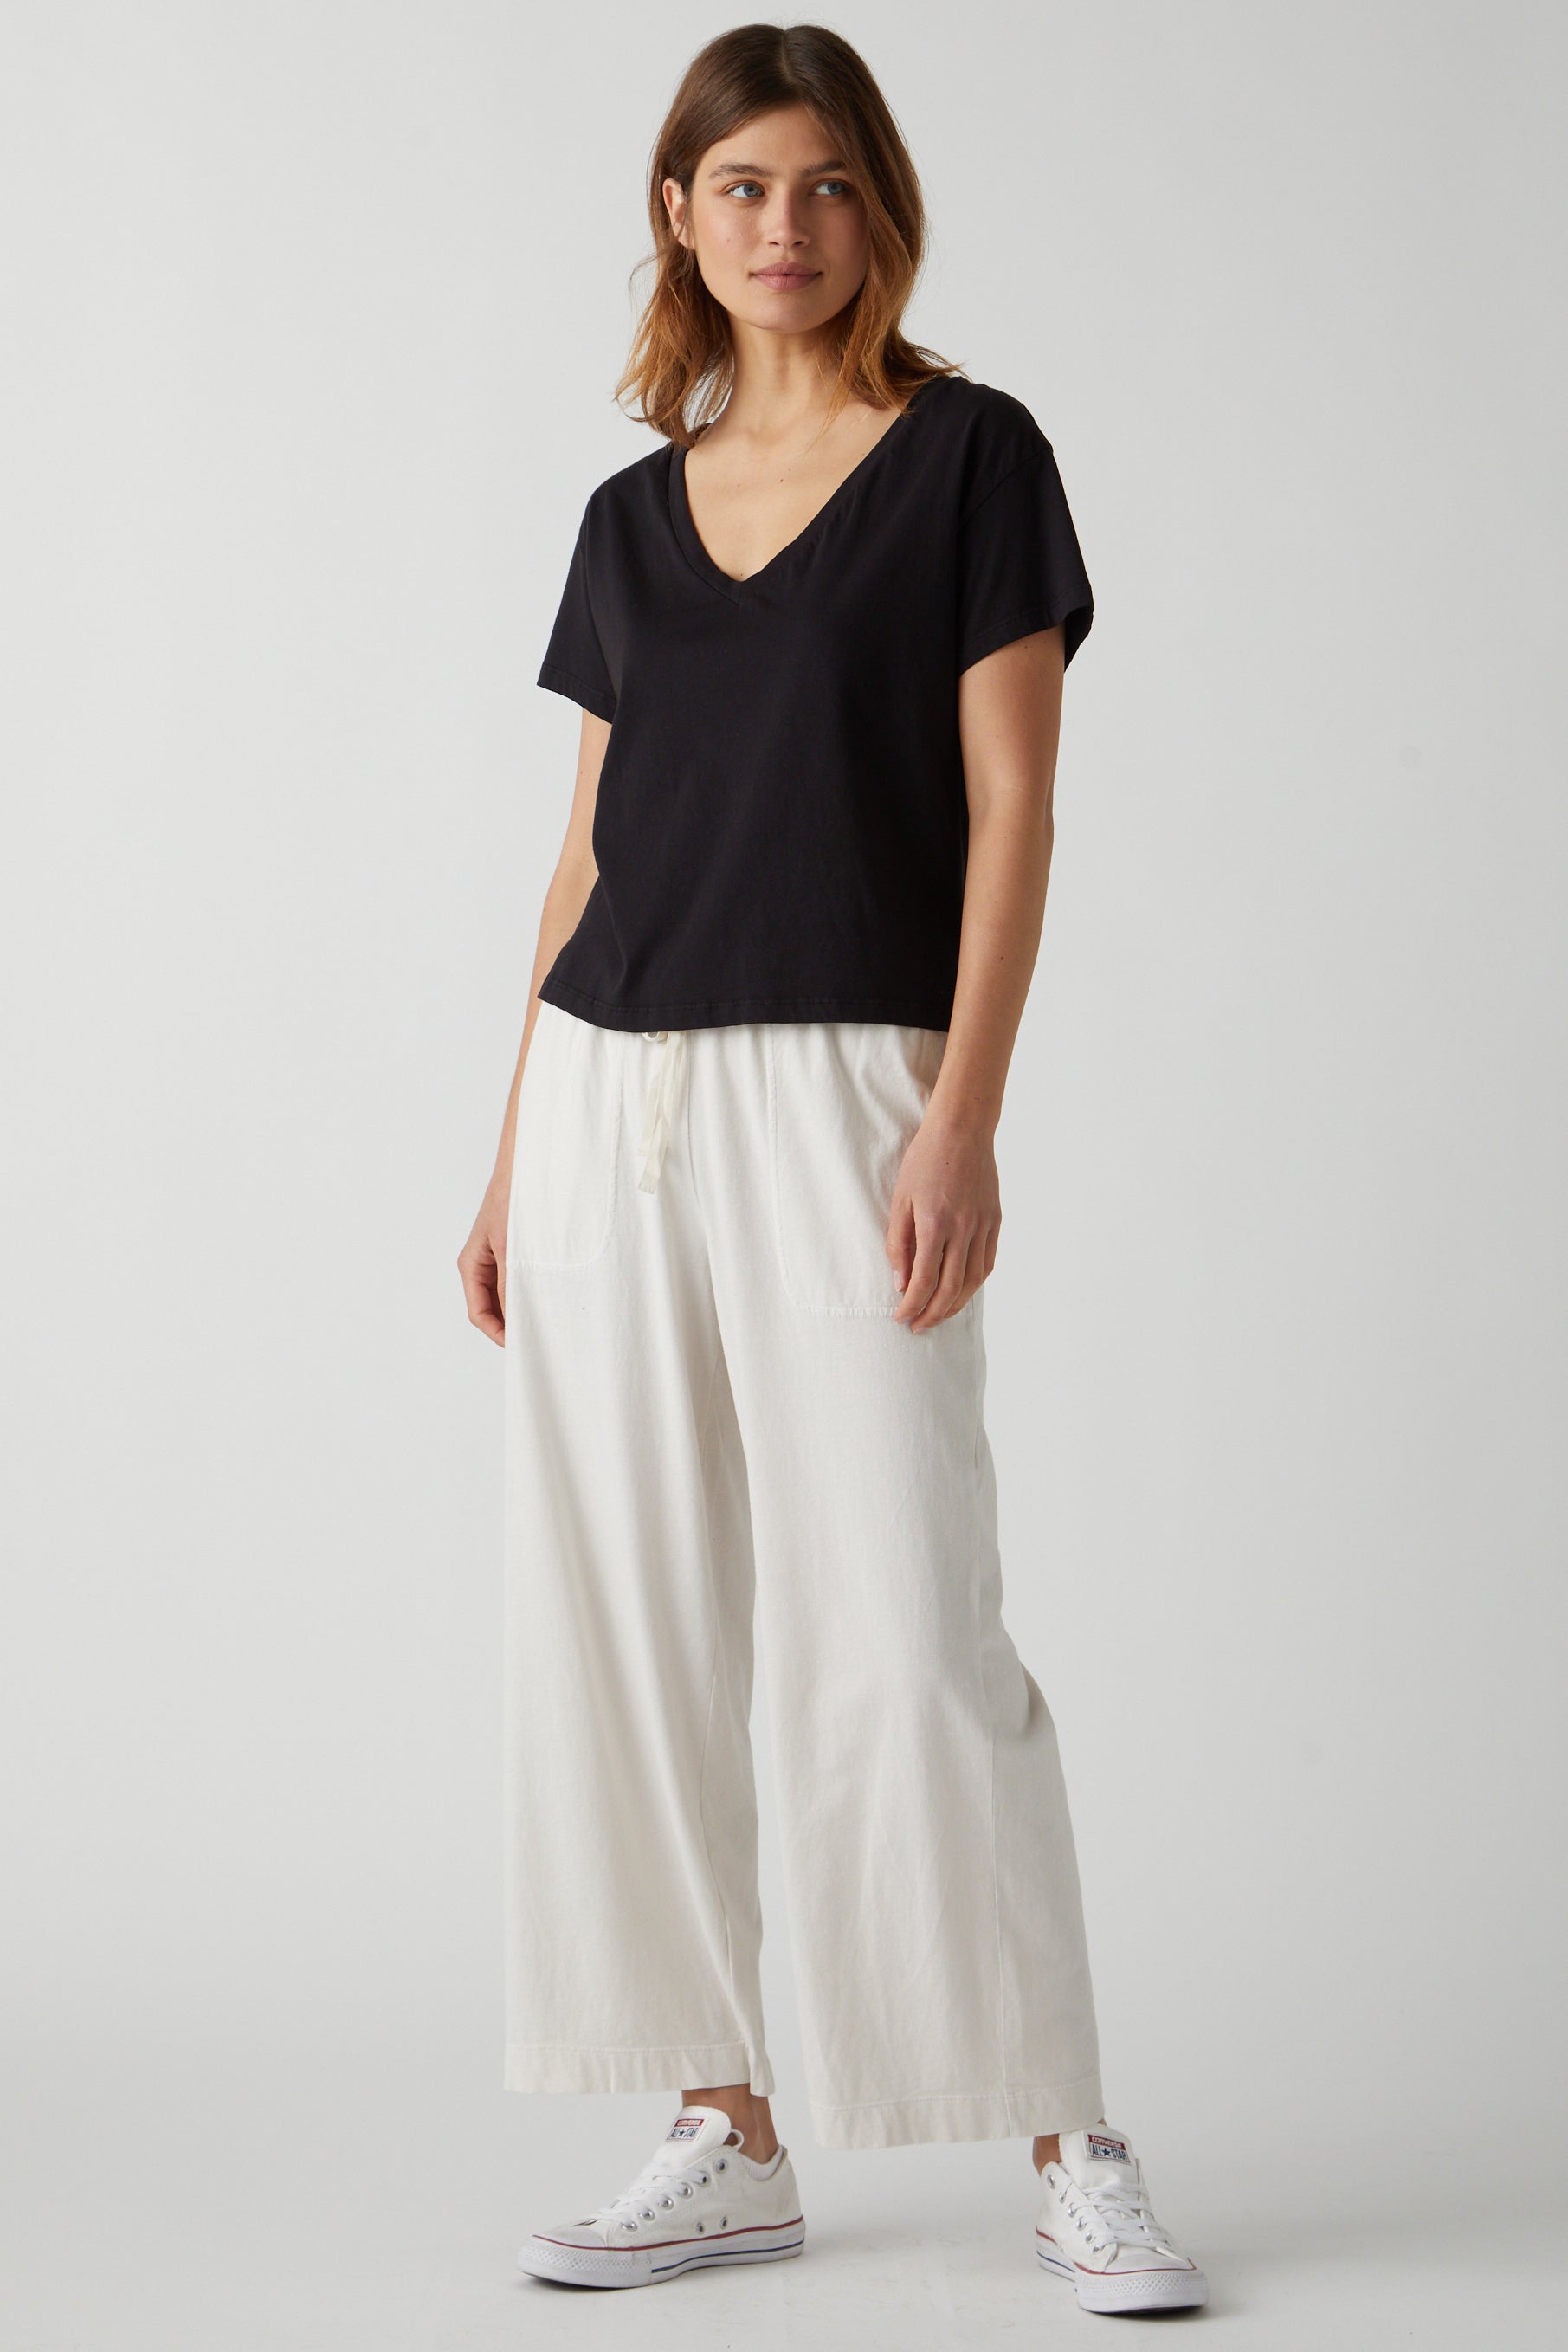   Pismo Pant in beach with Venice Tee in Black full length front 